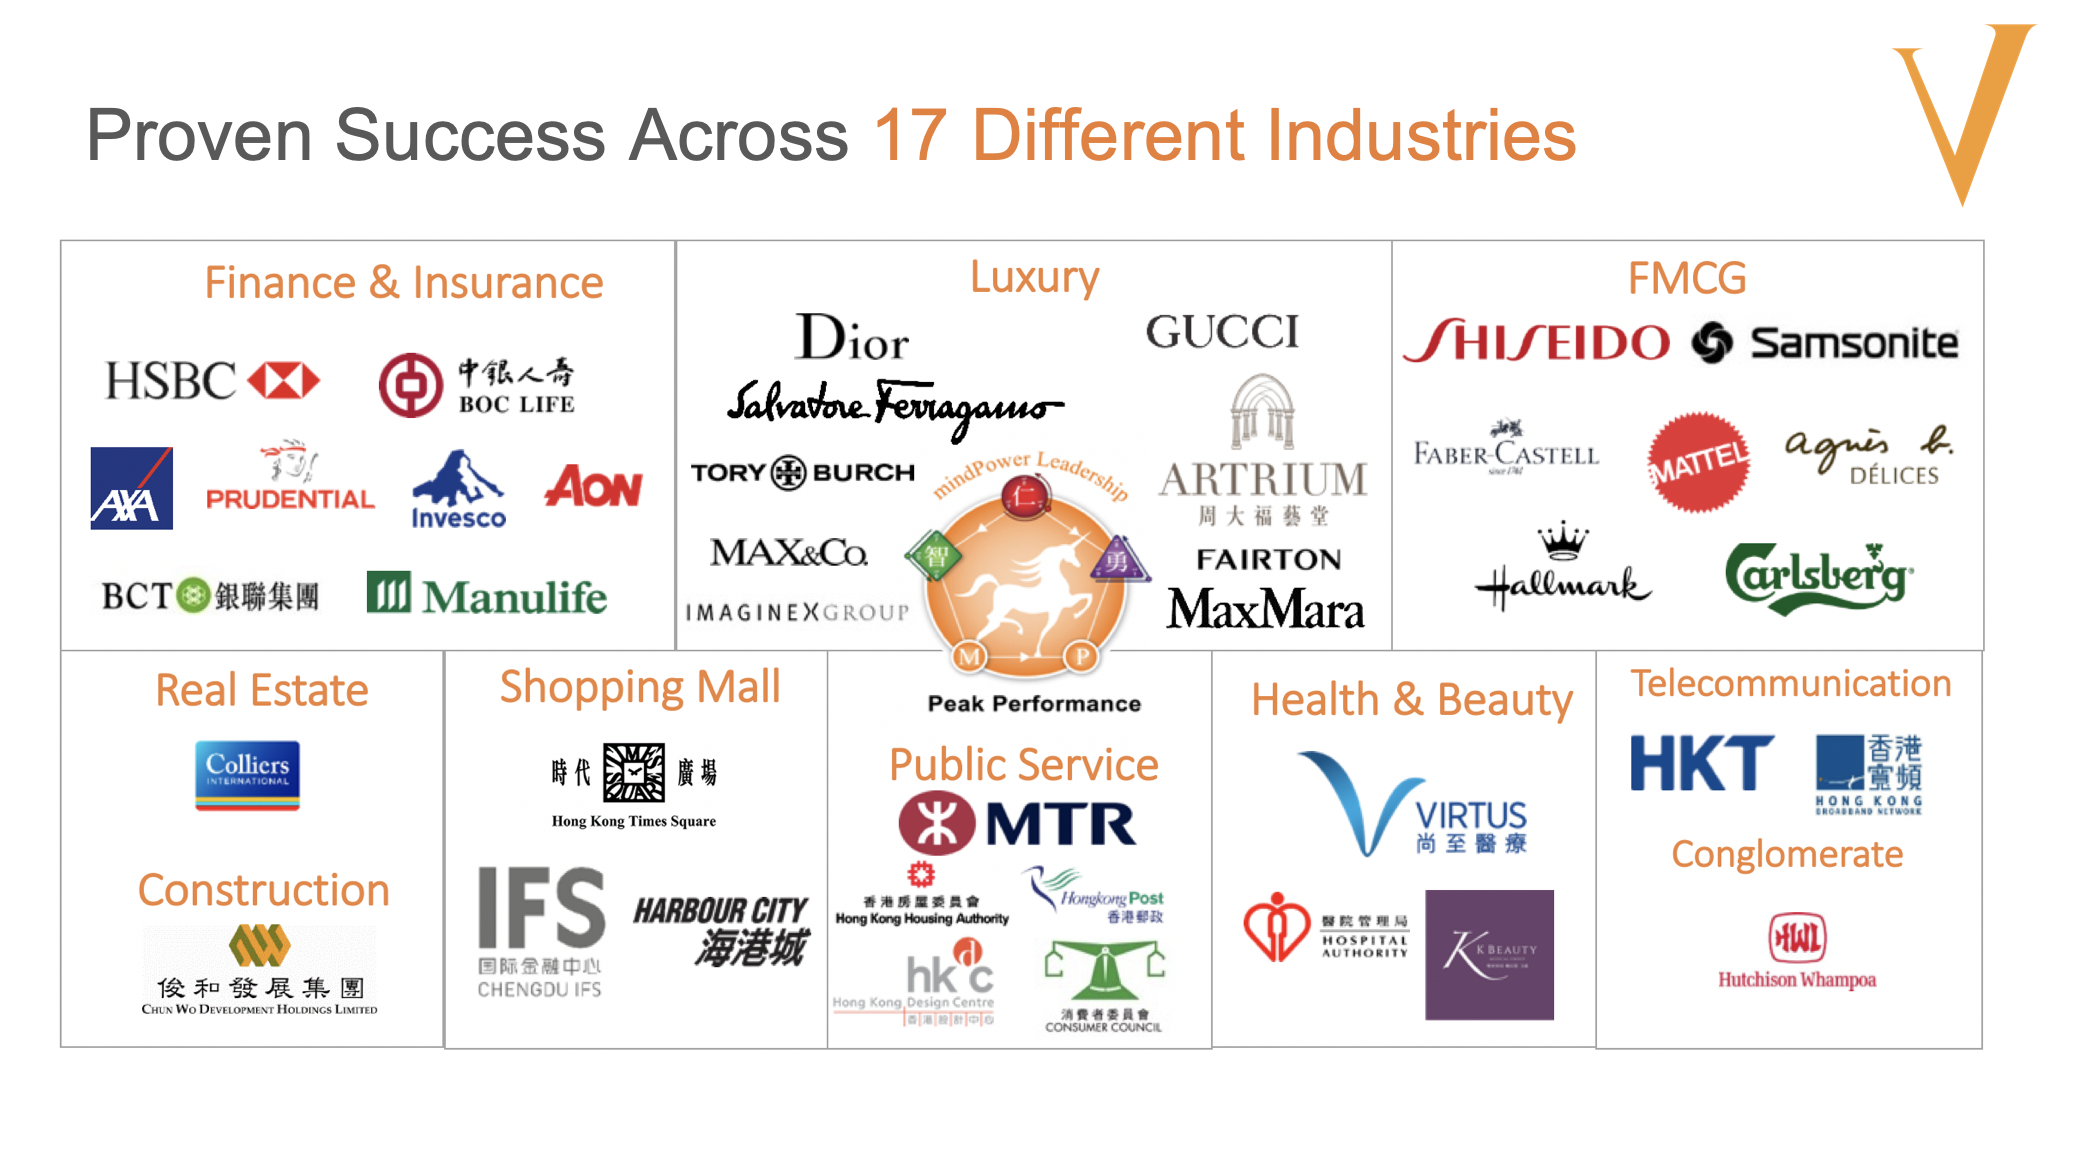 Proven Success for 17 Different Industries